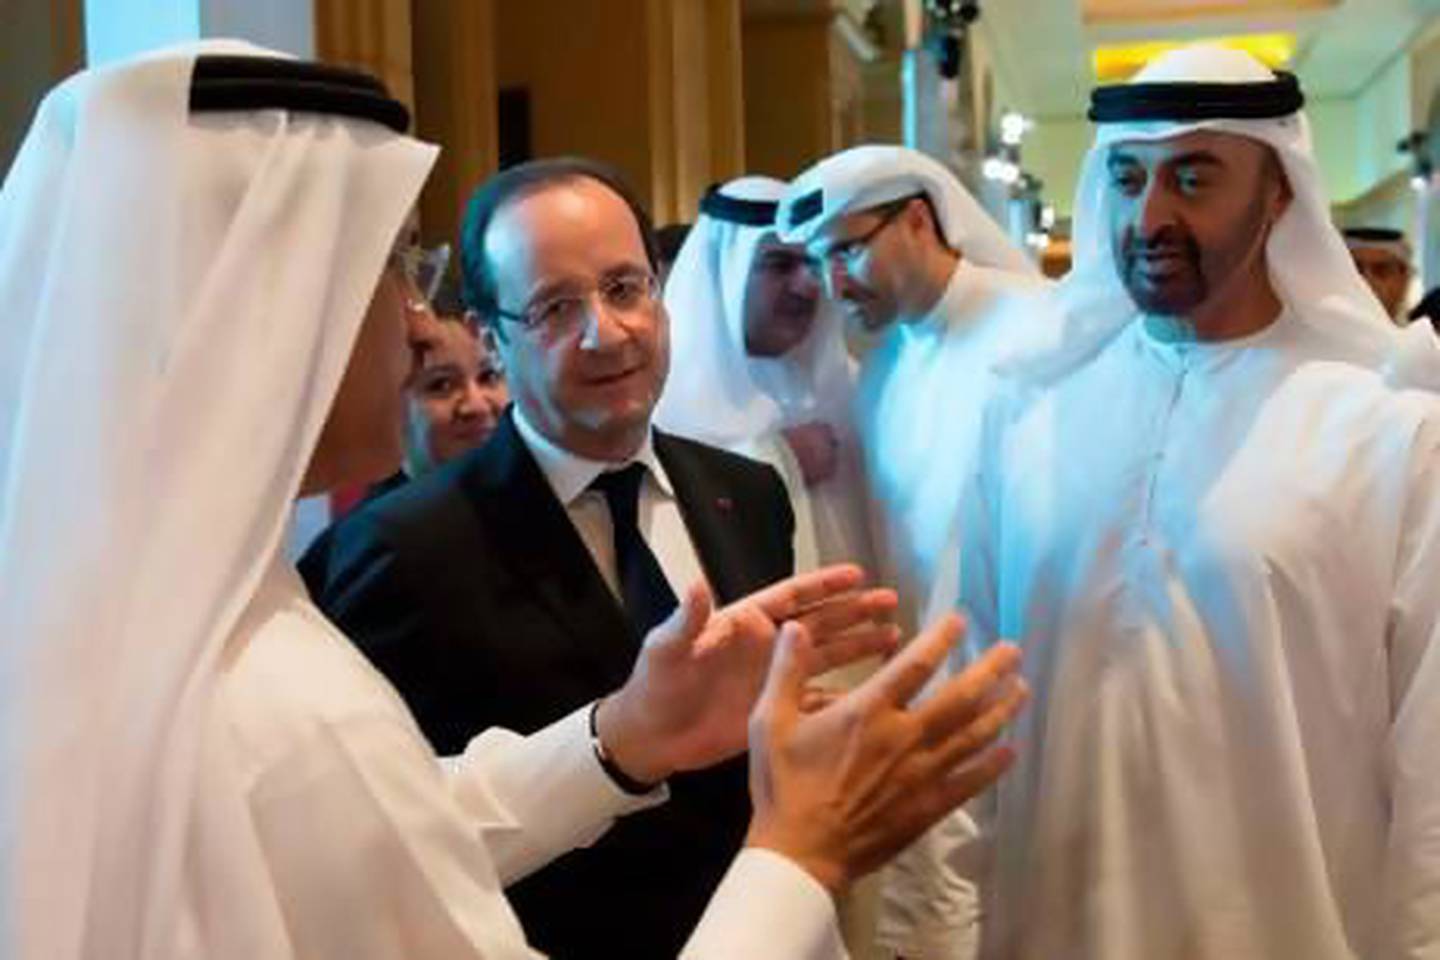 Former French president Francois Hollande and Sheikh Mohammed bin Zayed in the Emirates palace. Mr Hollande has called for countries to face sanction if they fail to meet climate goals. AFP